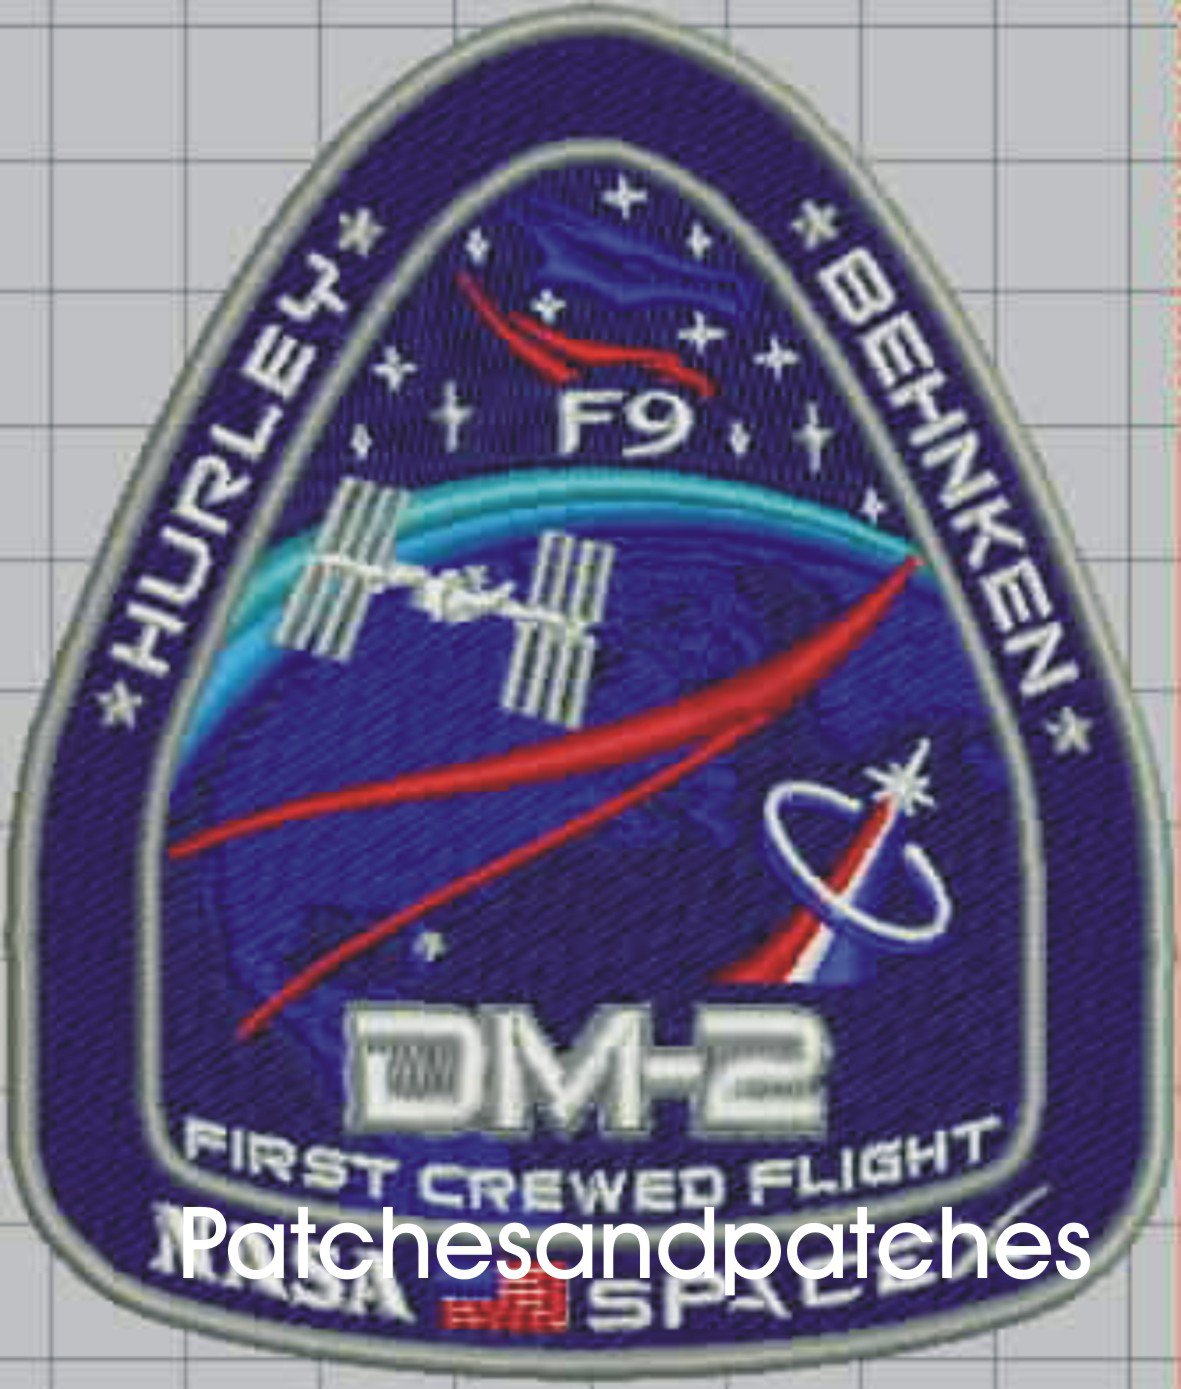 F9 ISS NASA SPACE Mission PATCH Behnken Hurley SPACEX DM-2 FIRST CREWED FLIGHT